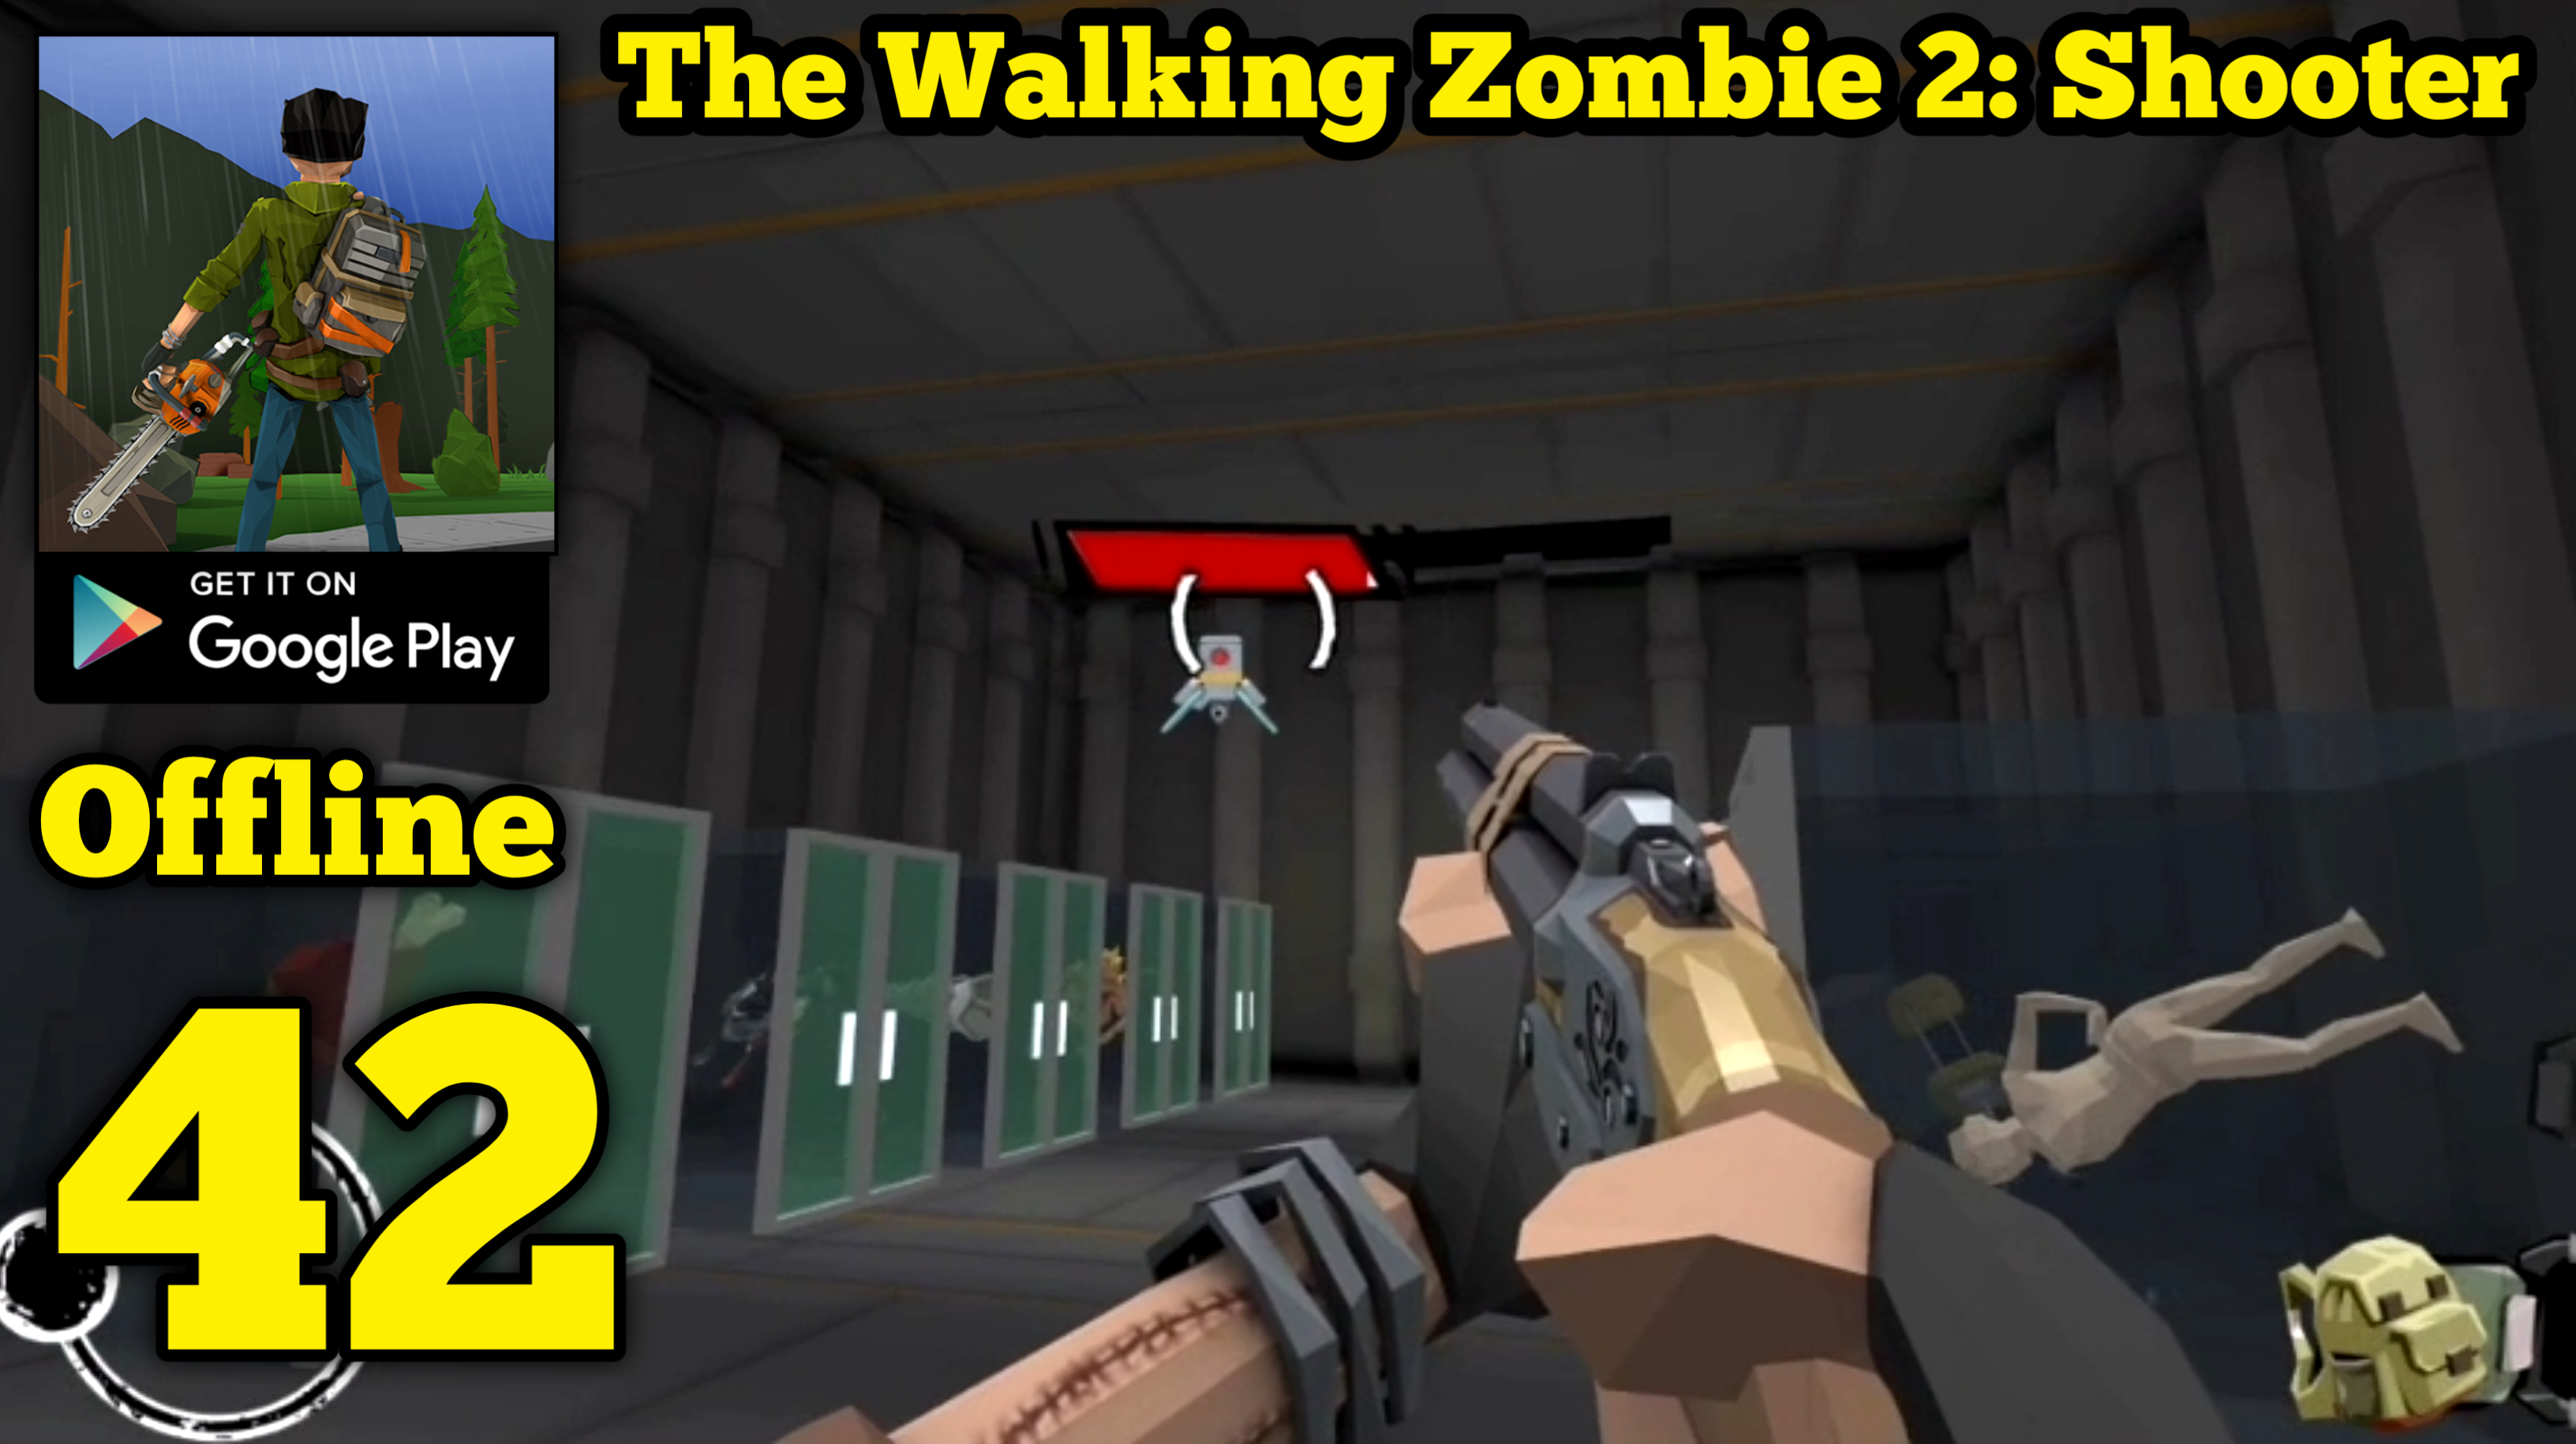 The Walking Zombie 2 News and Videos